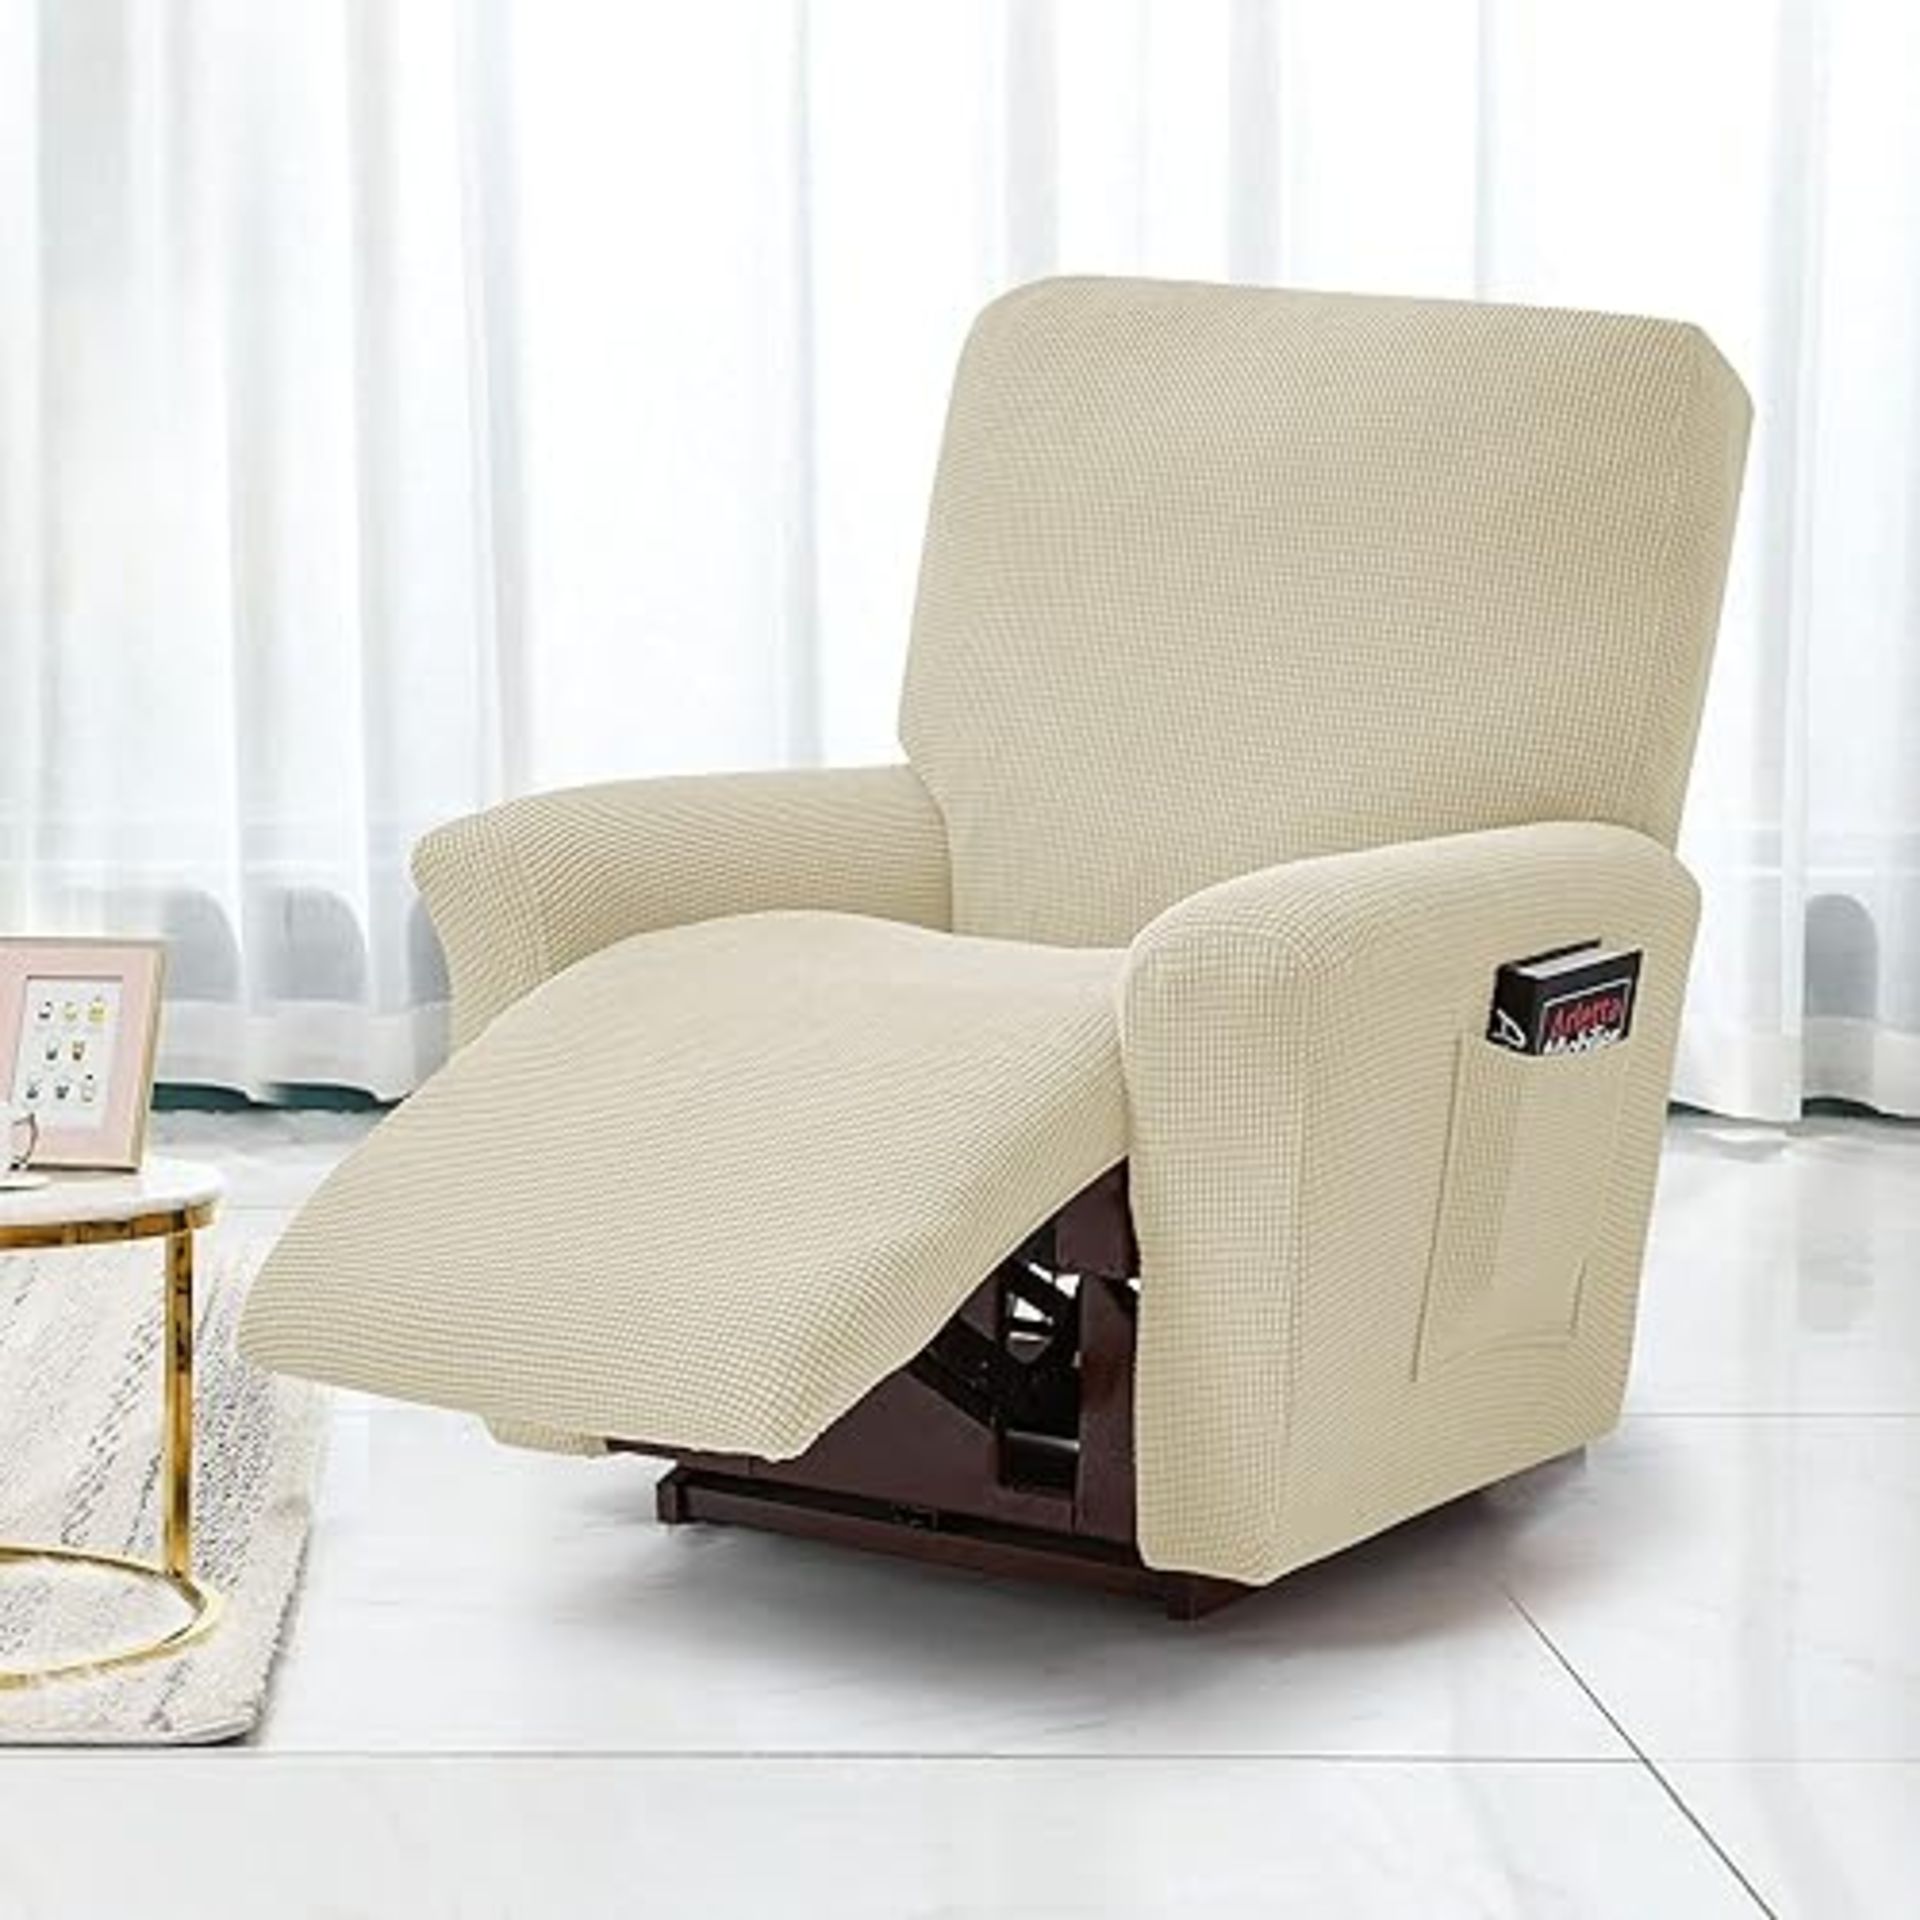 Stretch Recliner Covers, Jacquard Recliner Chair Slipcovers, Polyester Furniture Cover Recliner S...